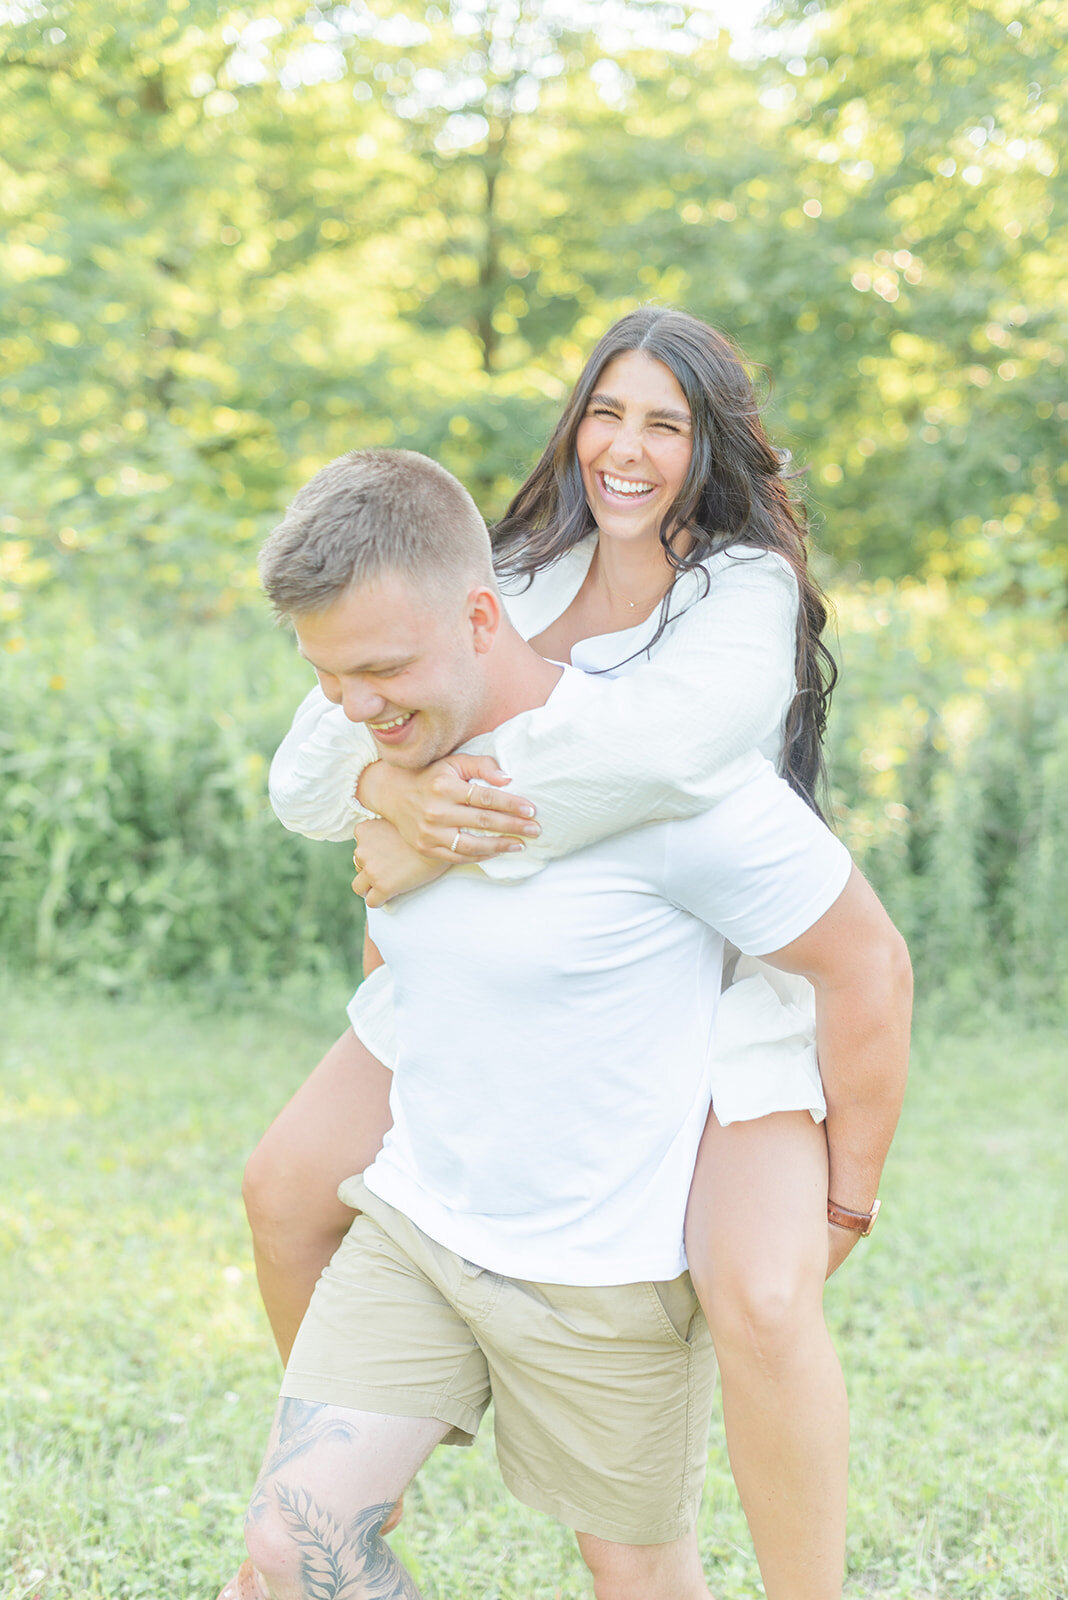 carmen-may-photography-couples-pittsburgh-pa-131_websize